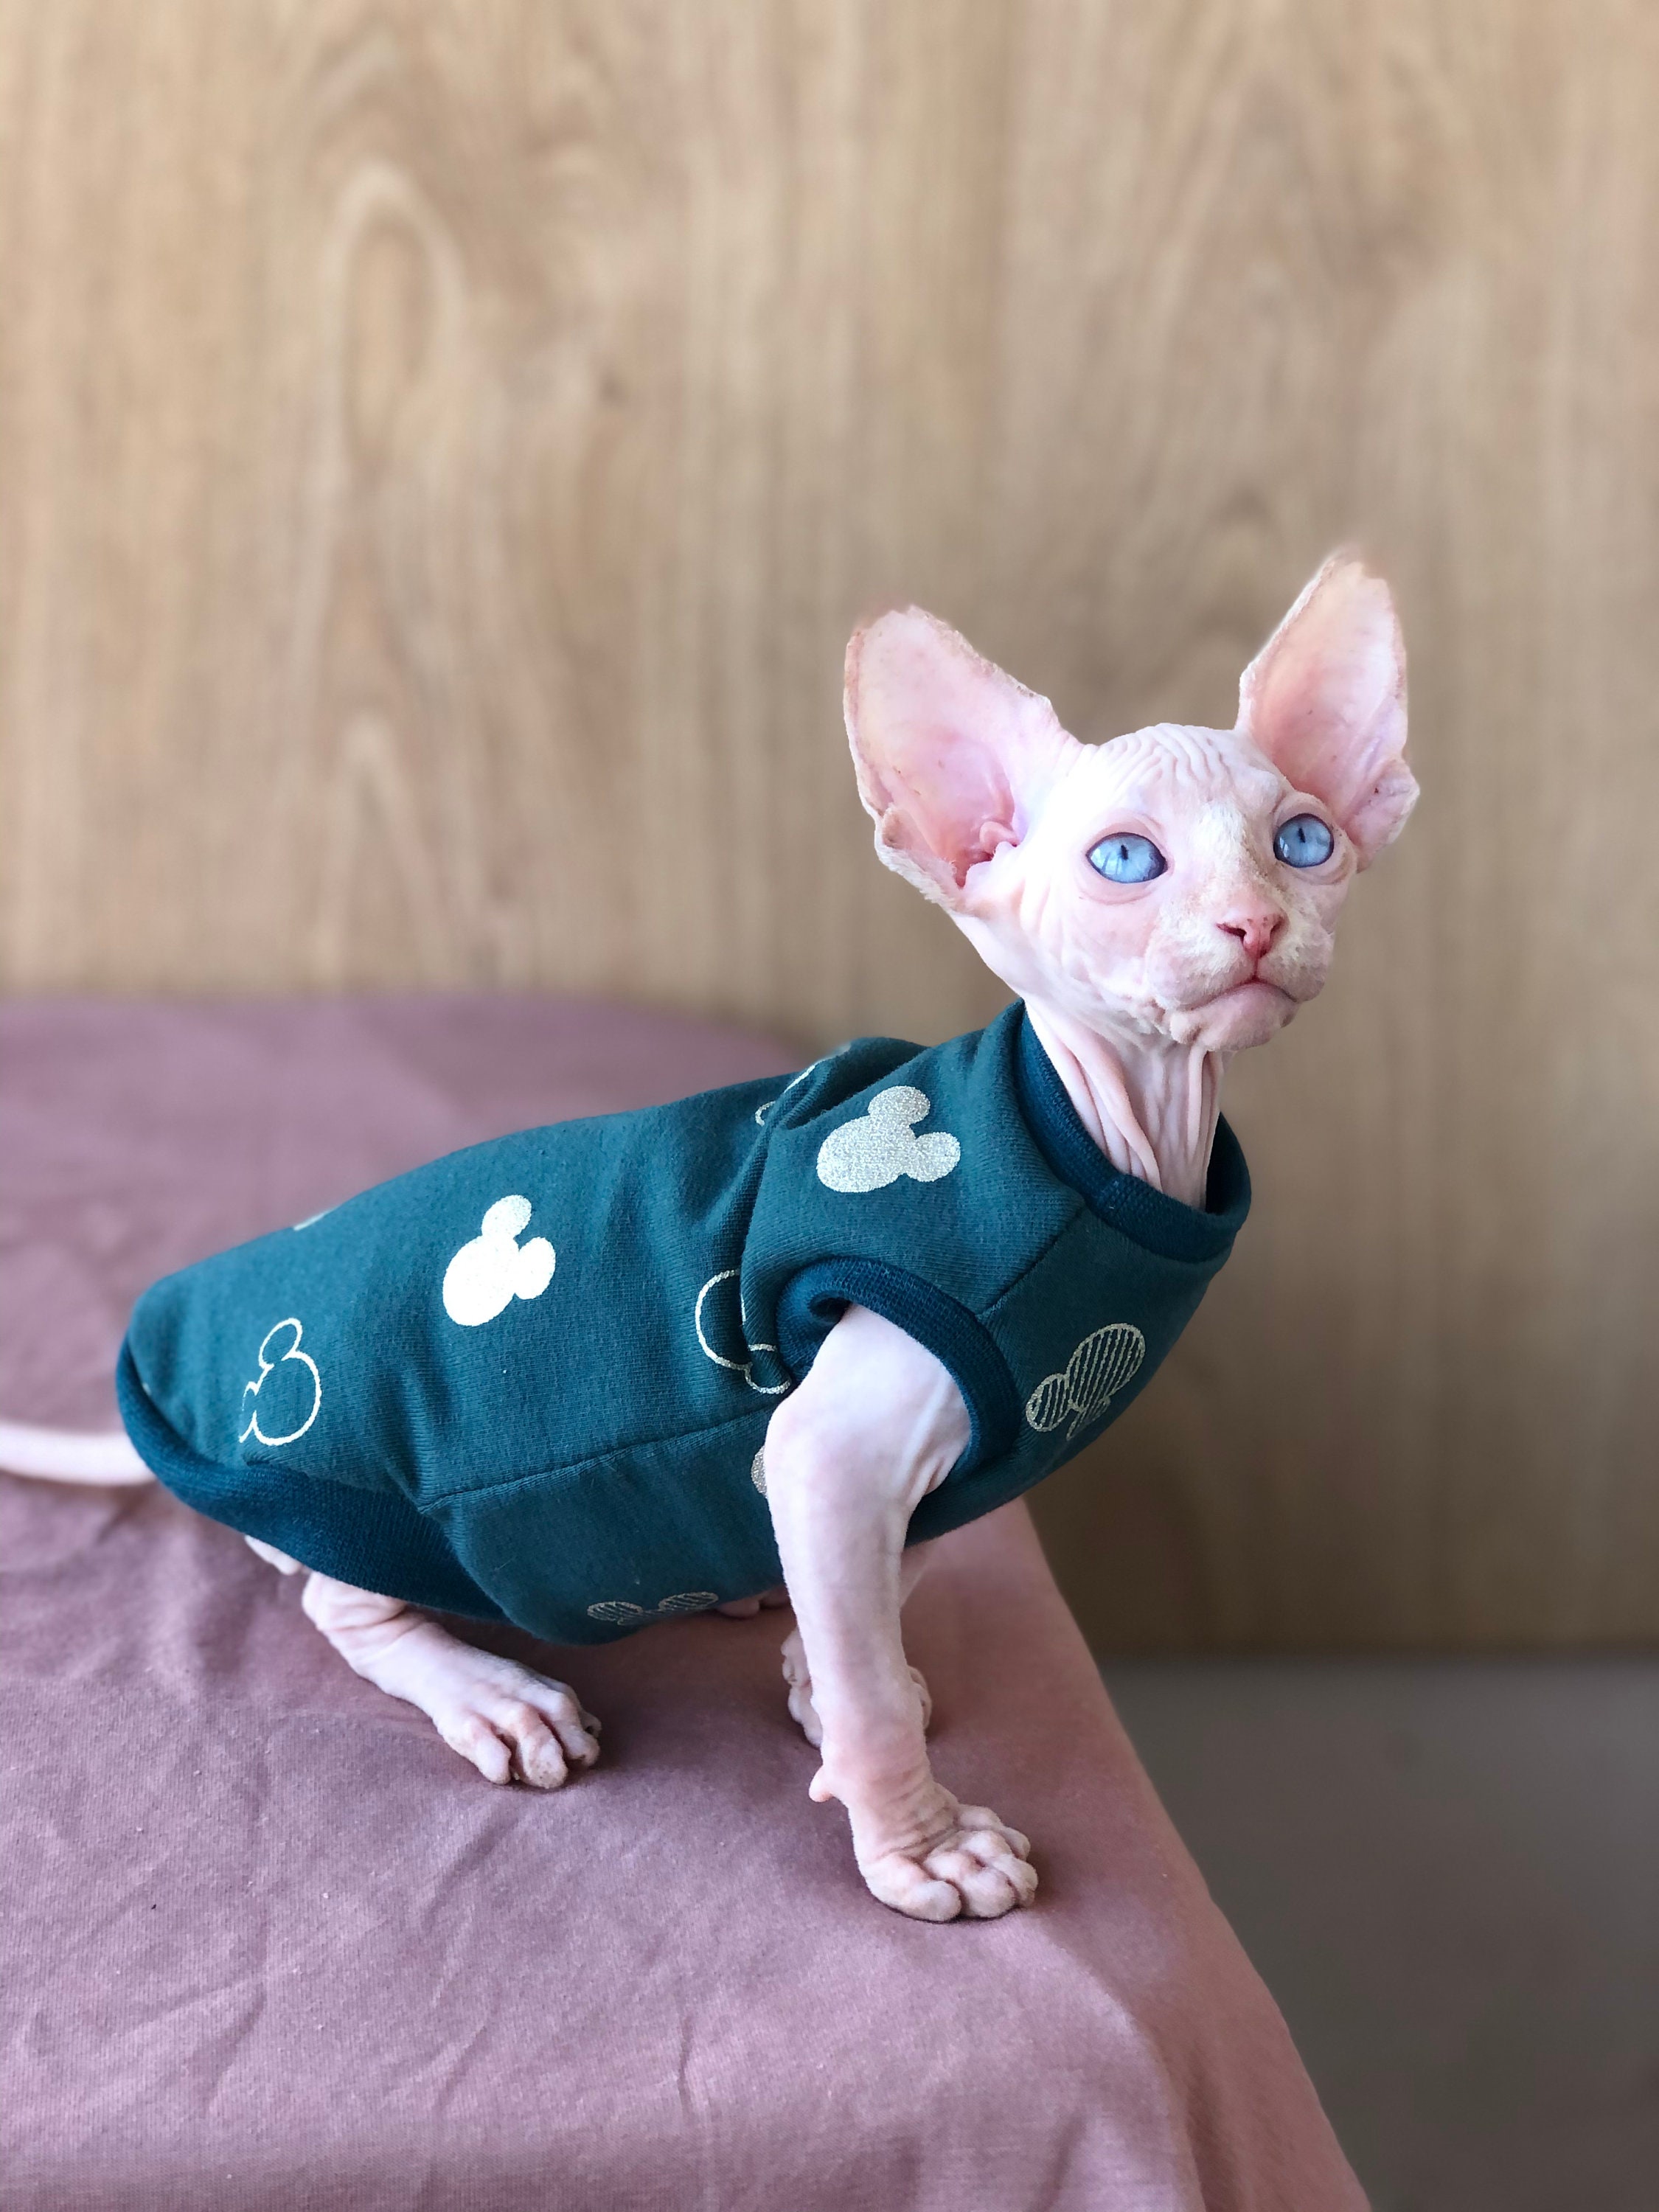 Anelekor Cute Cat Sweater Dresses with Necktie Decor Pet School Uniform  Costume Puppy Spring Autumn Outfit Soft Knitted Skirt Shirts for Cat Rabbit